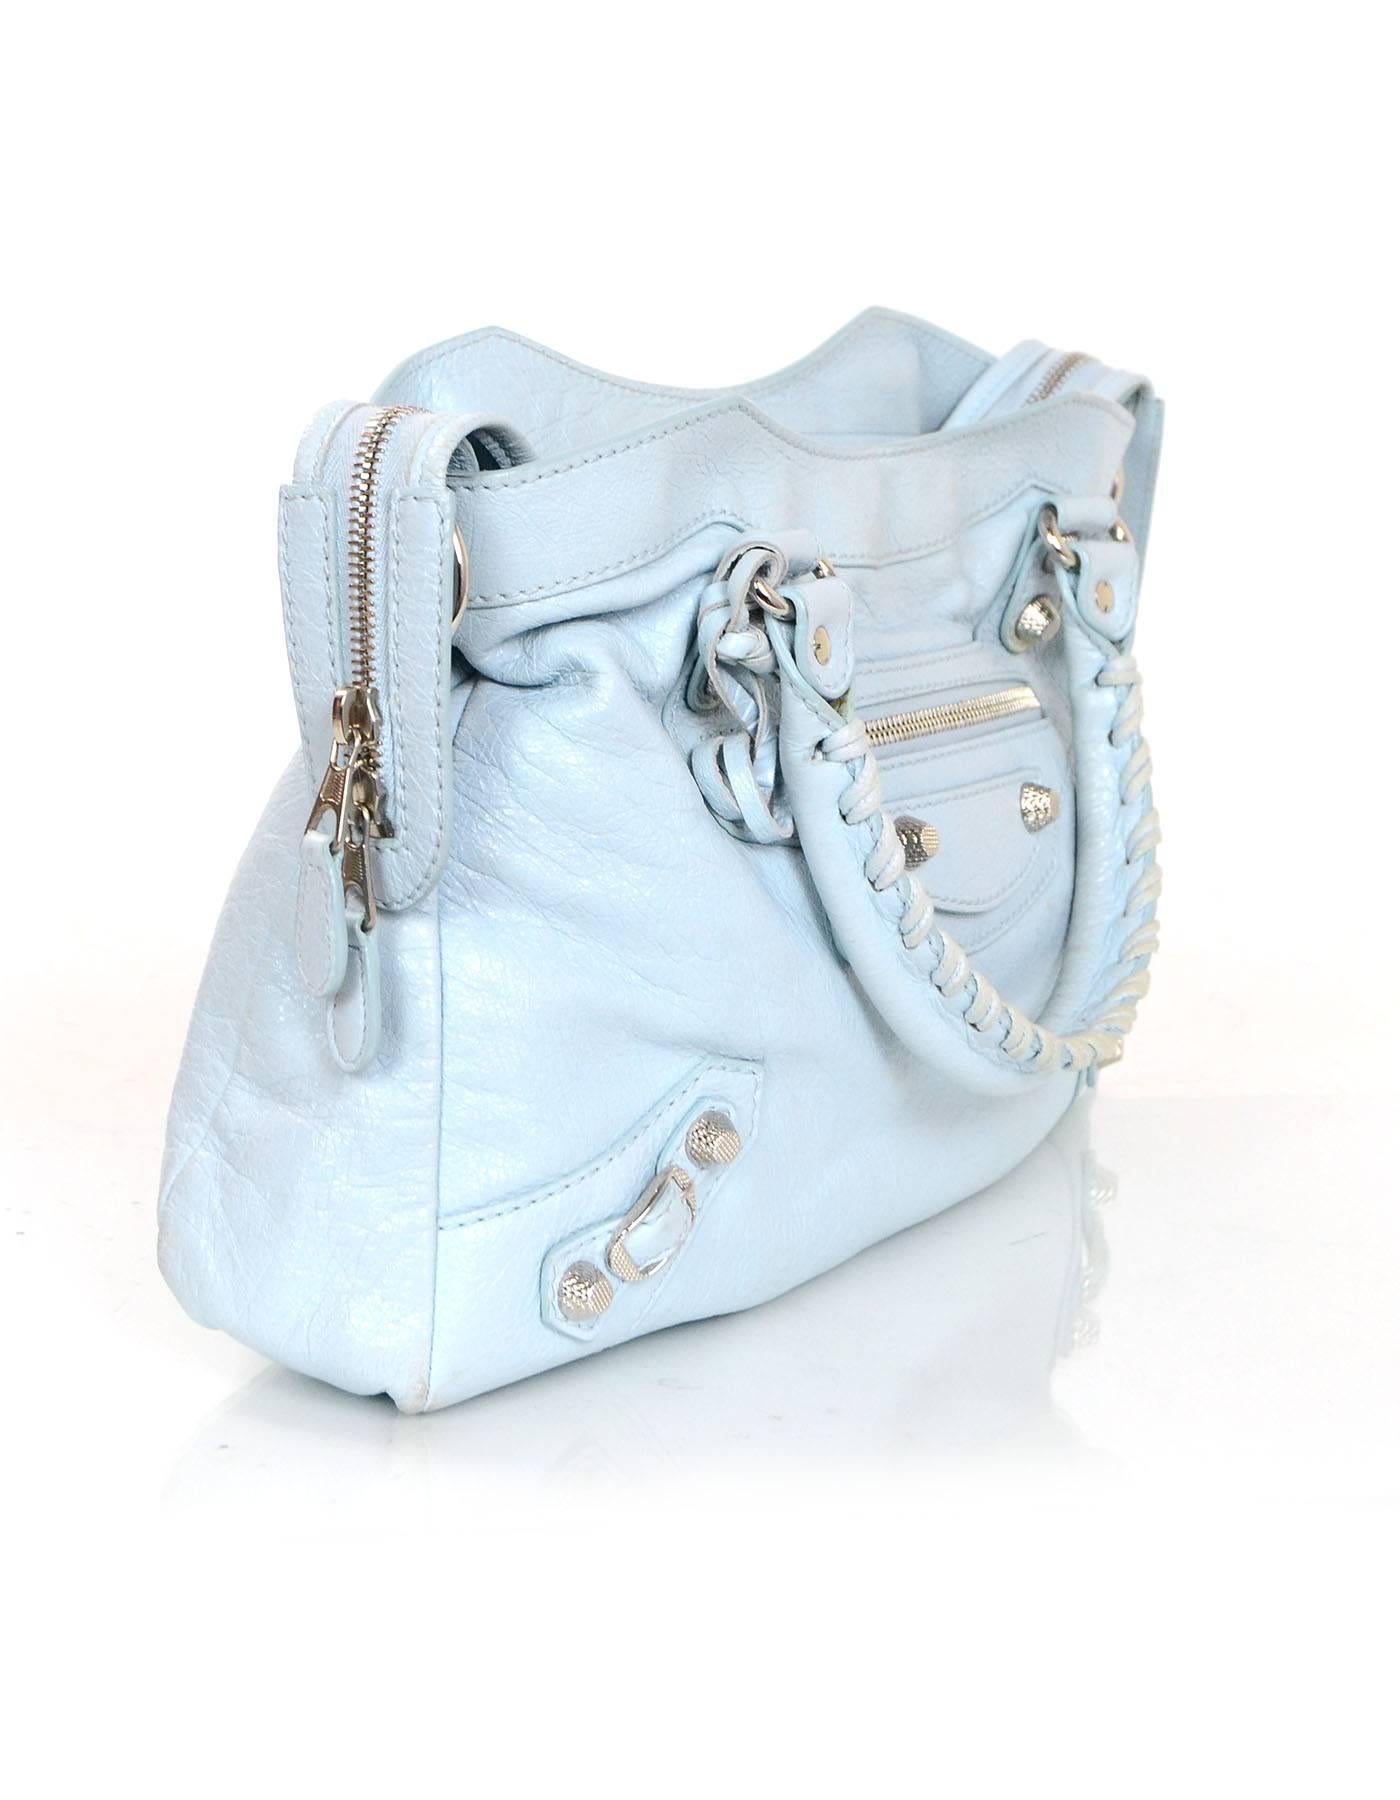 Balenciaga Baby Blue Town Bag 
Features optional shoulder/crossbody strap and detachable travel mirror

Made In: Italy
Year of Production: 2014
Color: Baby blue
Hardware: Silvertone
Materials: Distressed leather
Lining: Black